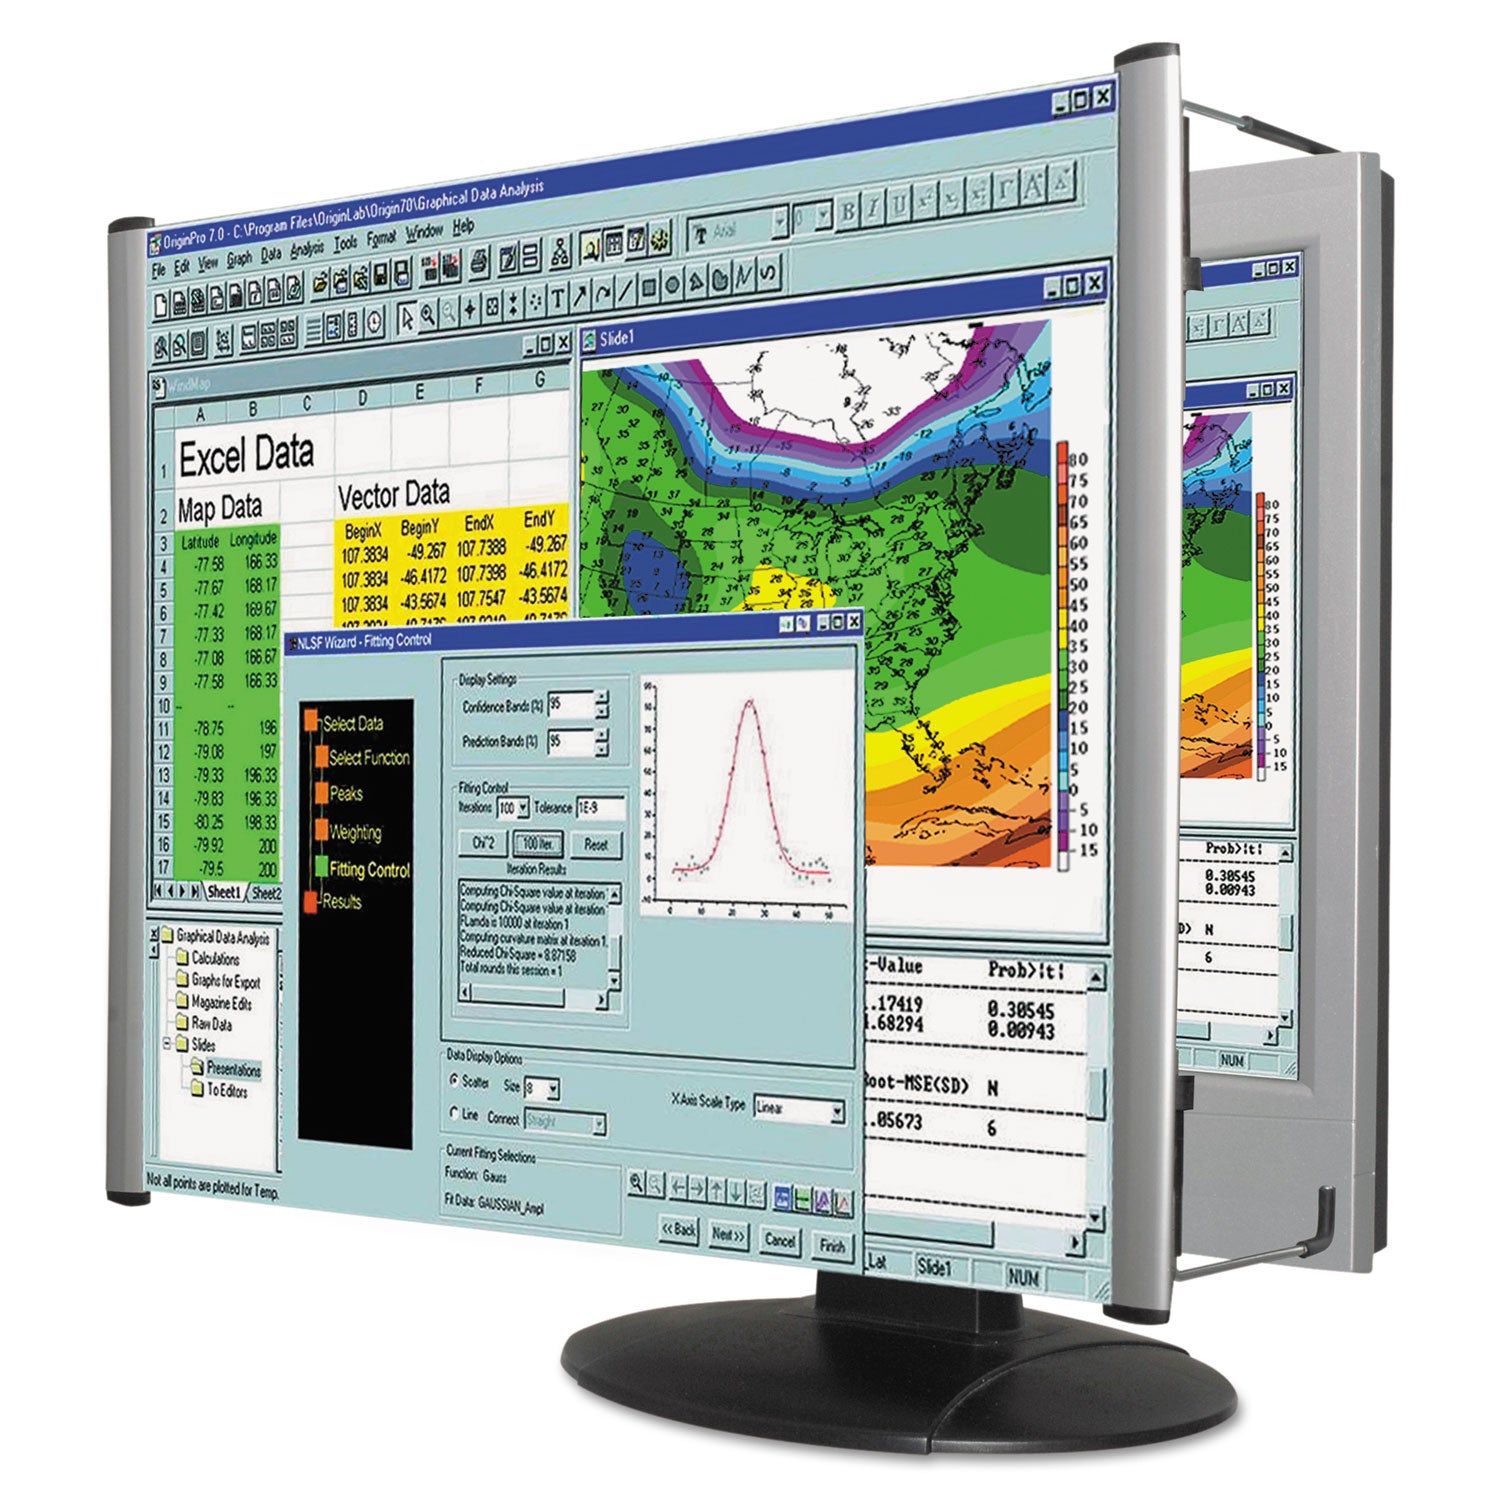 LCD Monitor Magnifier Filter for 22" Widescreen Flat Panel Monitor, 16:9/16:10 Aspect Ratio - 